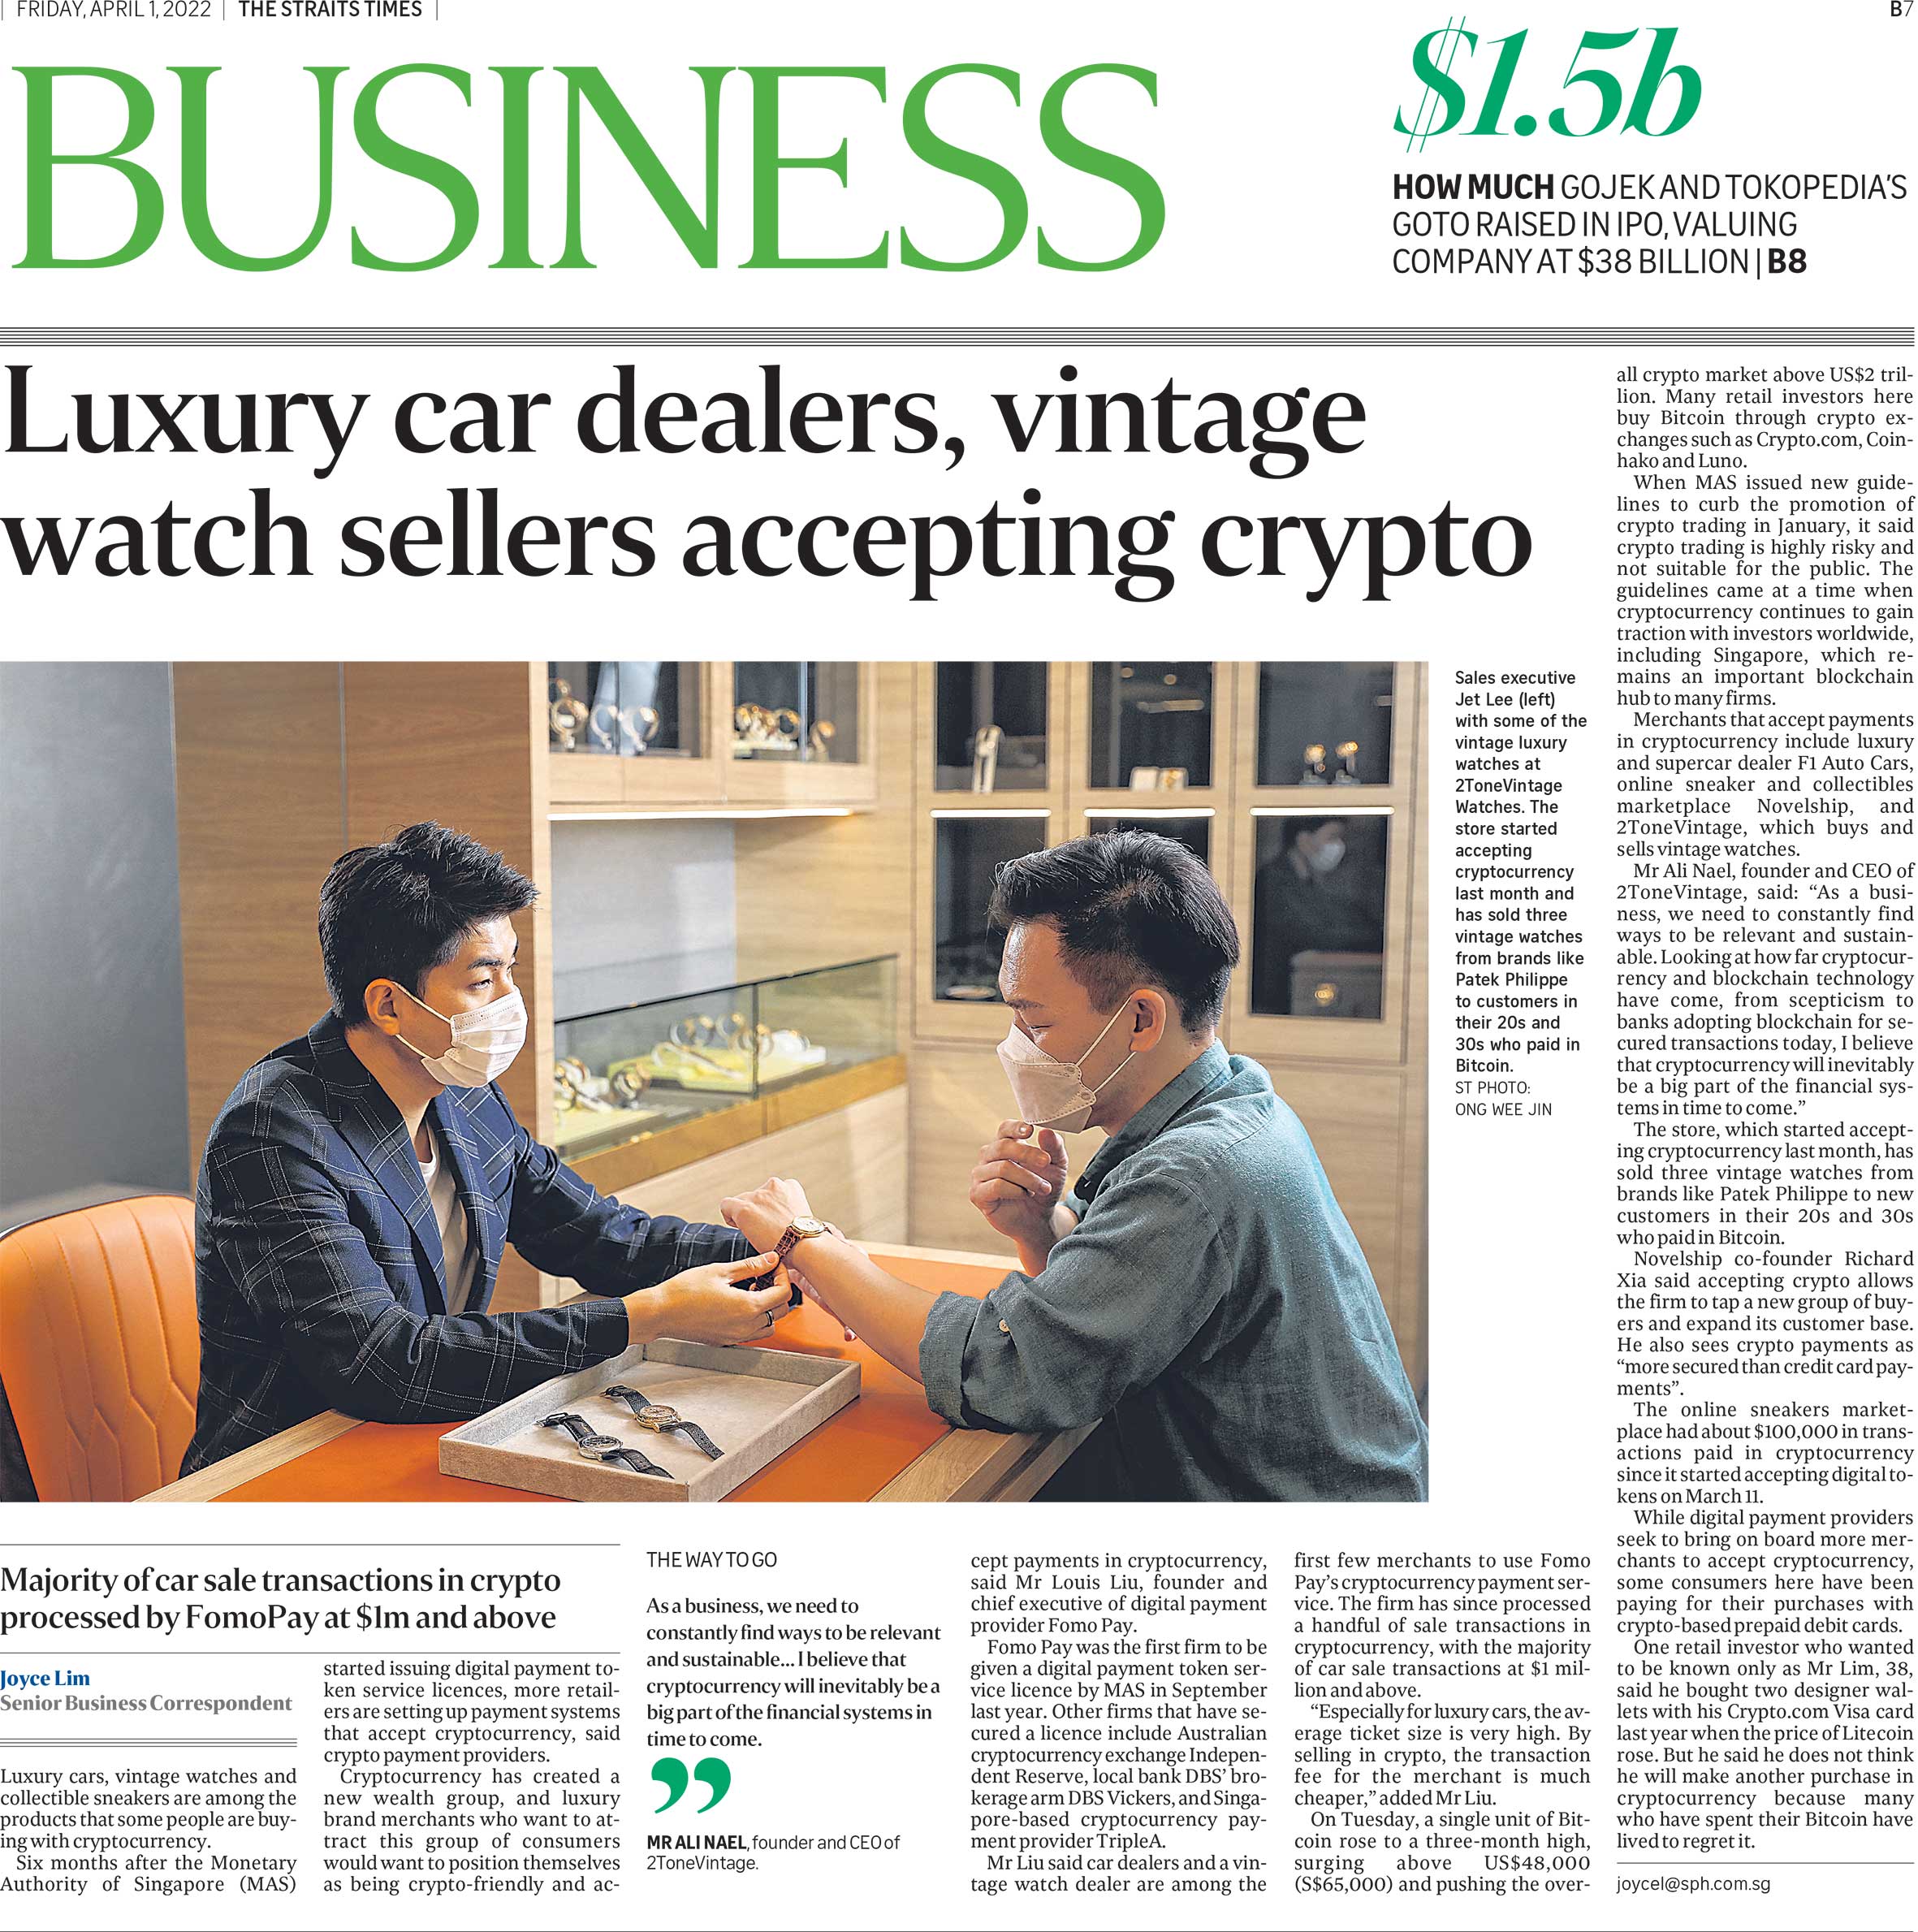  2ToneVintage Watches in the Newspaper dated 1 April 2022, for accepting Crypto-currencies.